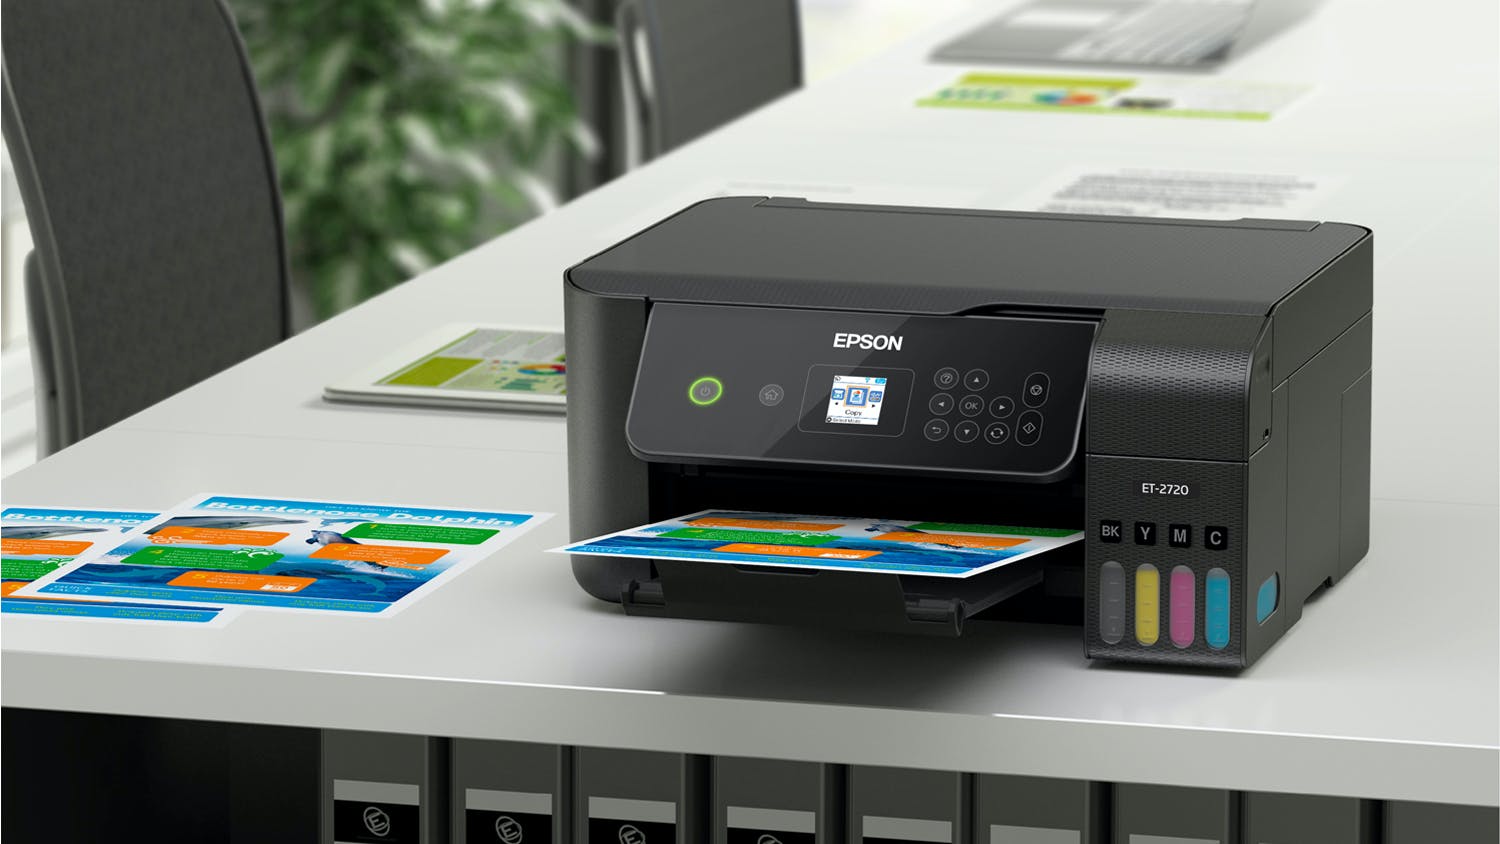 Epson EcoTank ET-2720 All-in-One Printer review